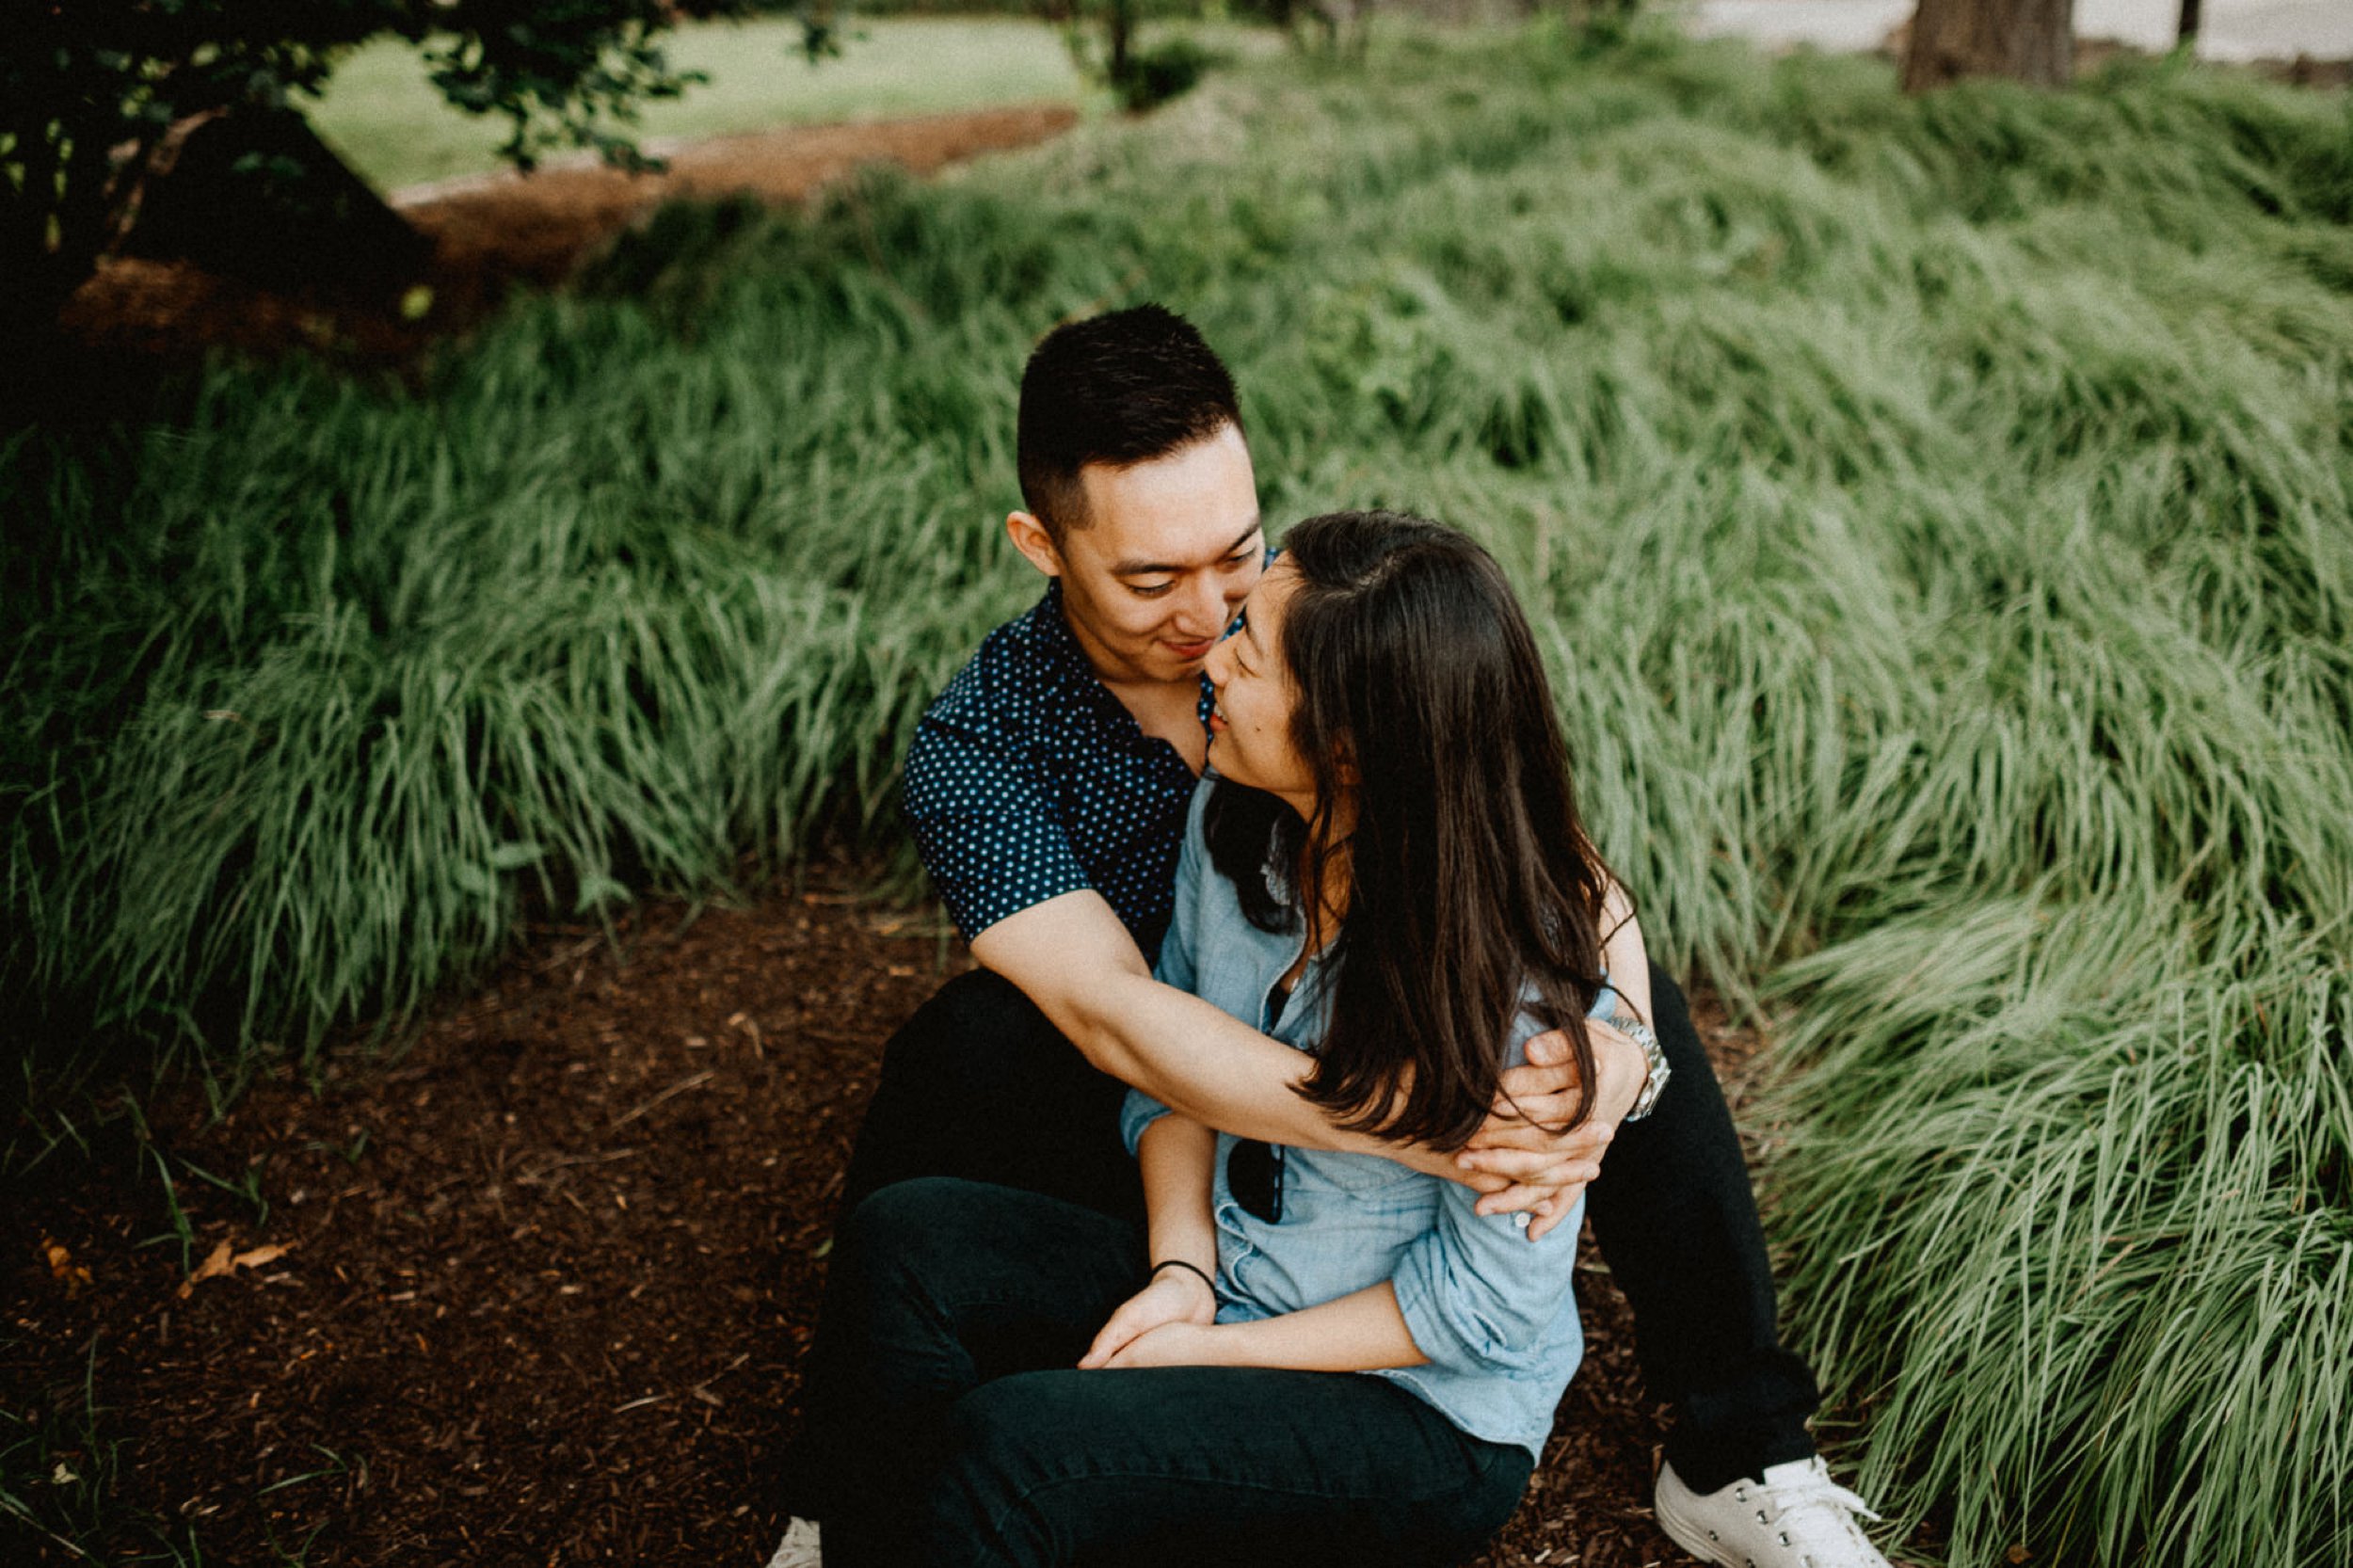 philly_engagement_session-15.jpg